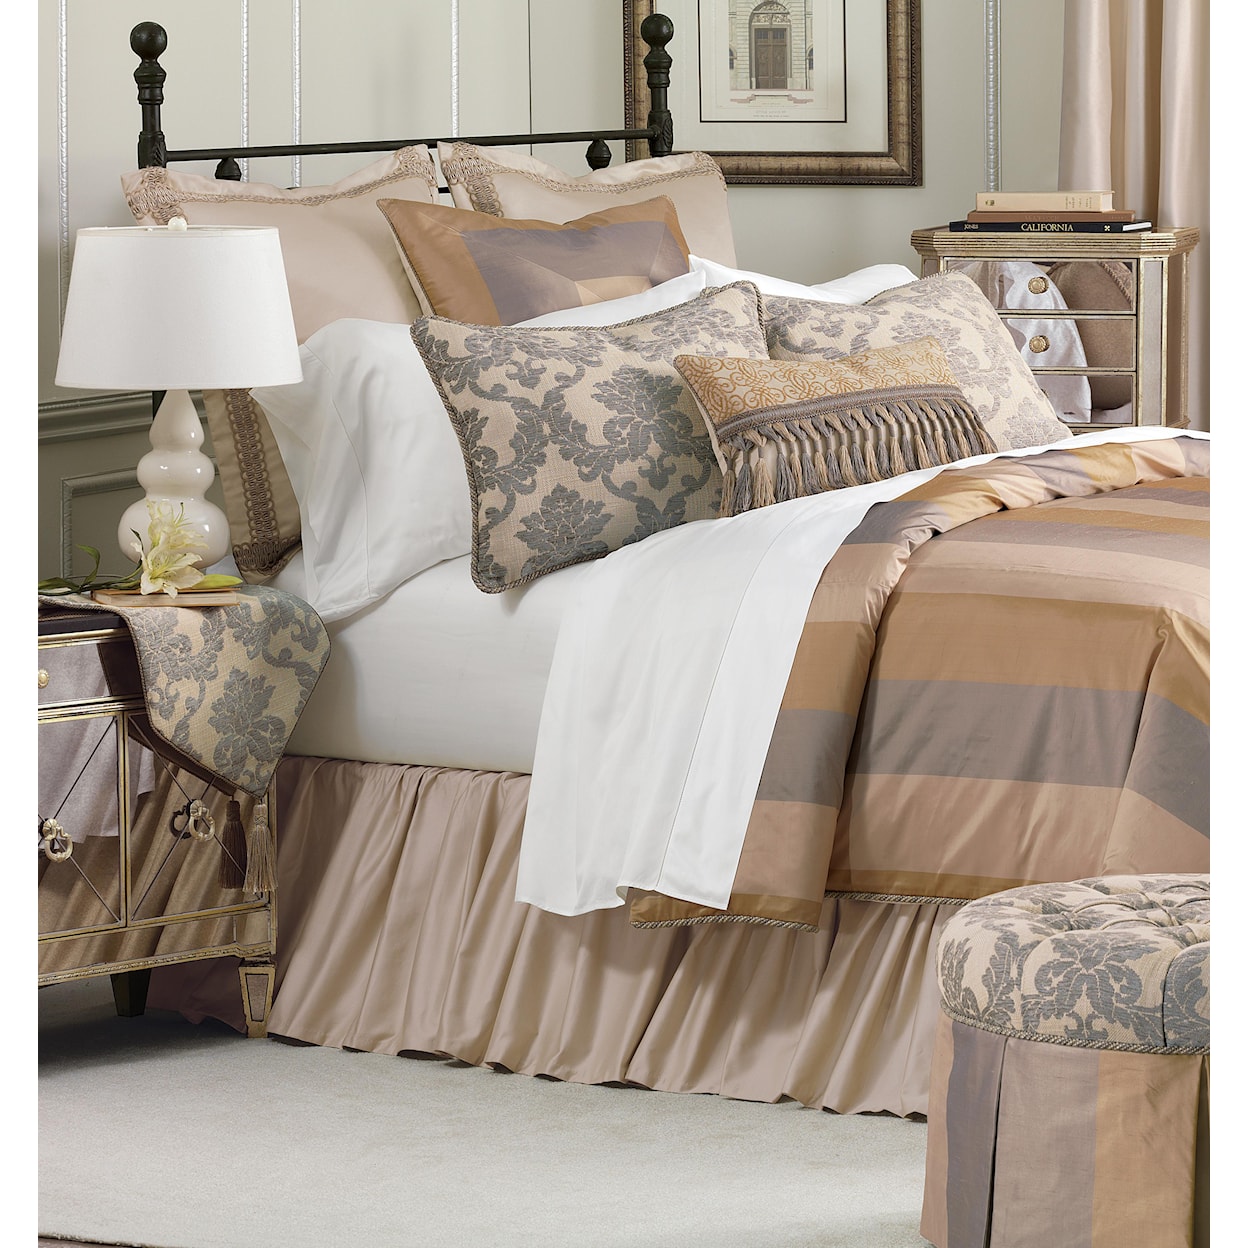 Eastern Accents Lancaster Cal King Bed Skirt